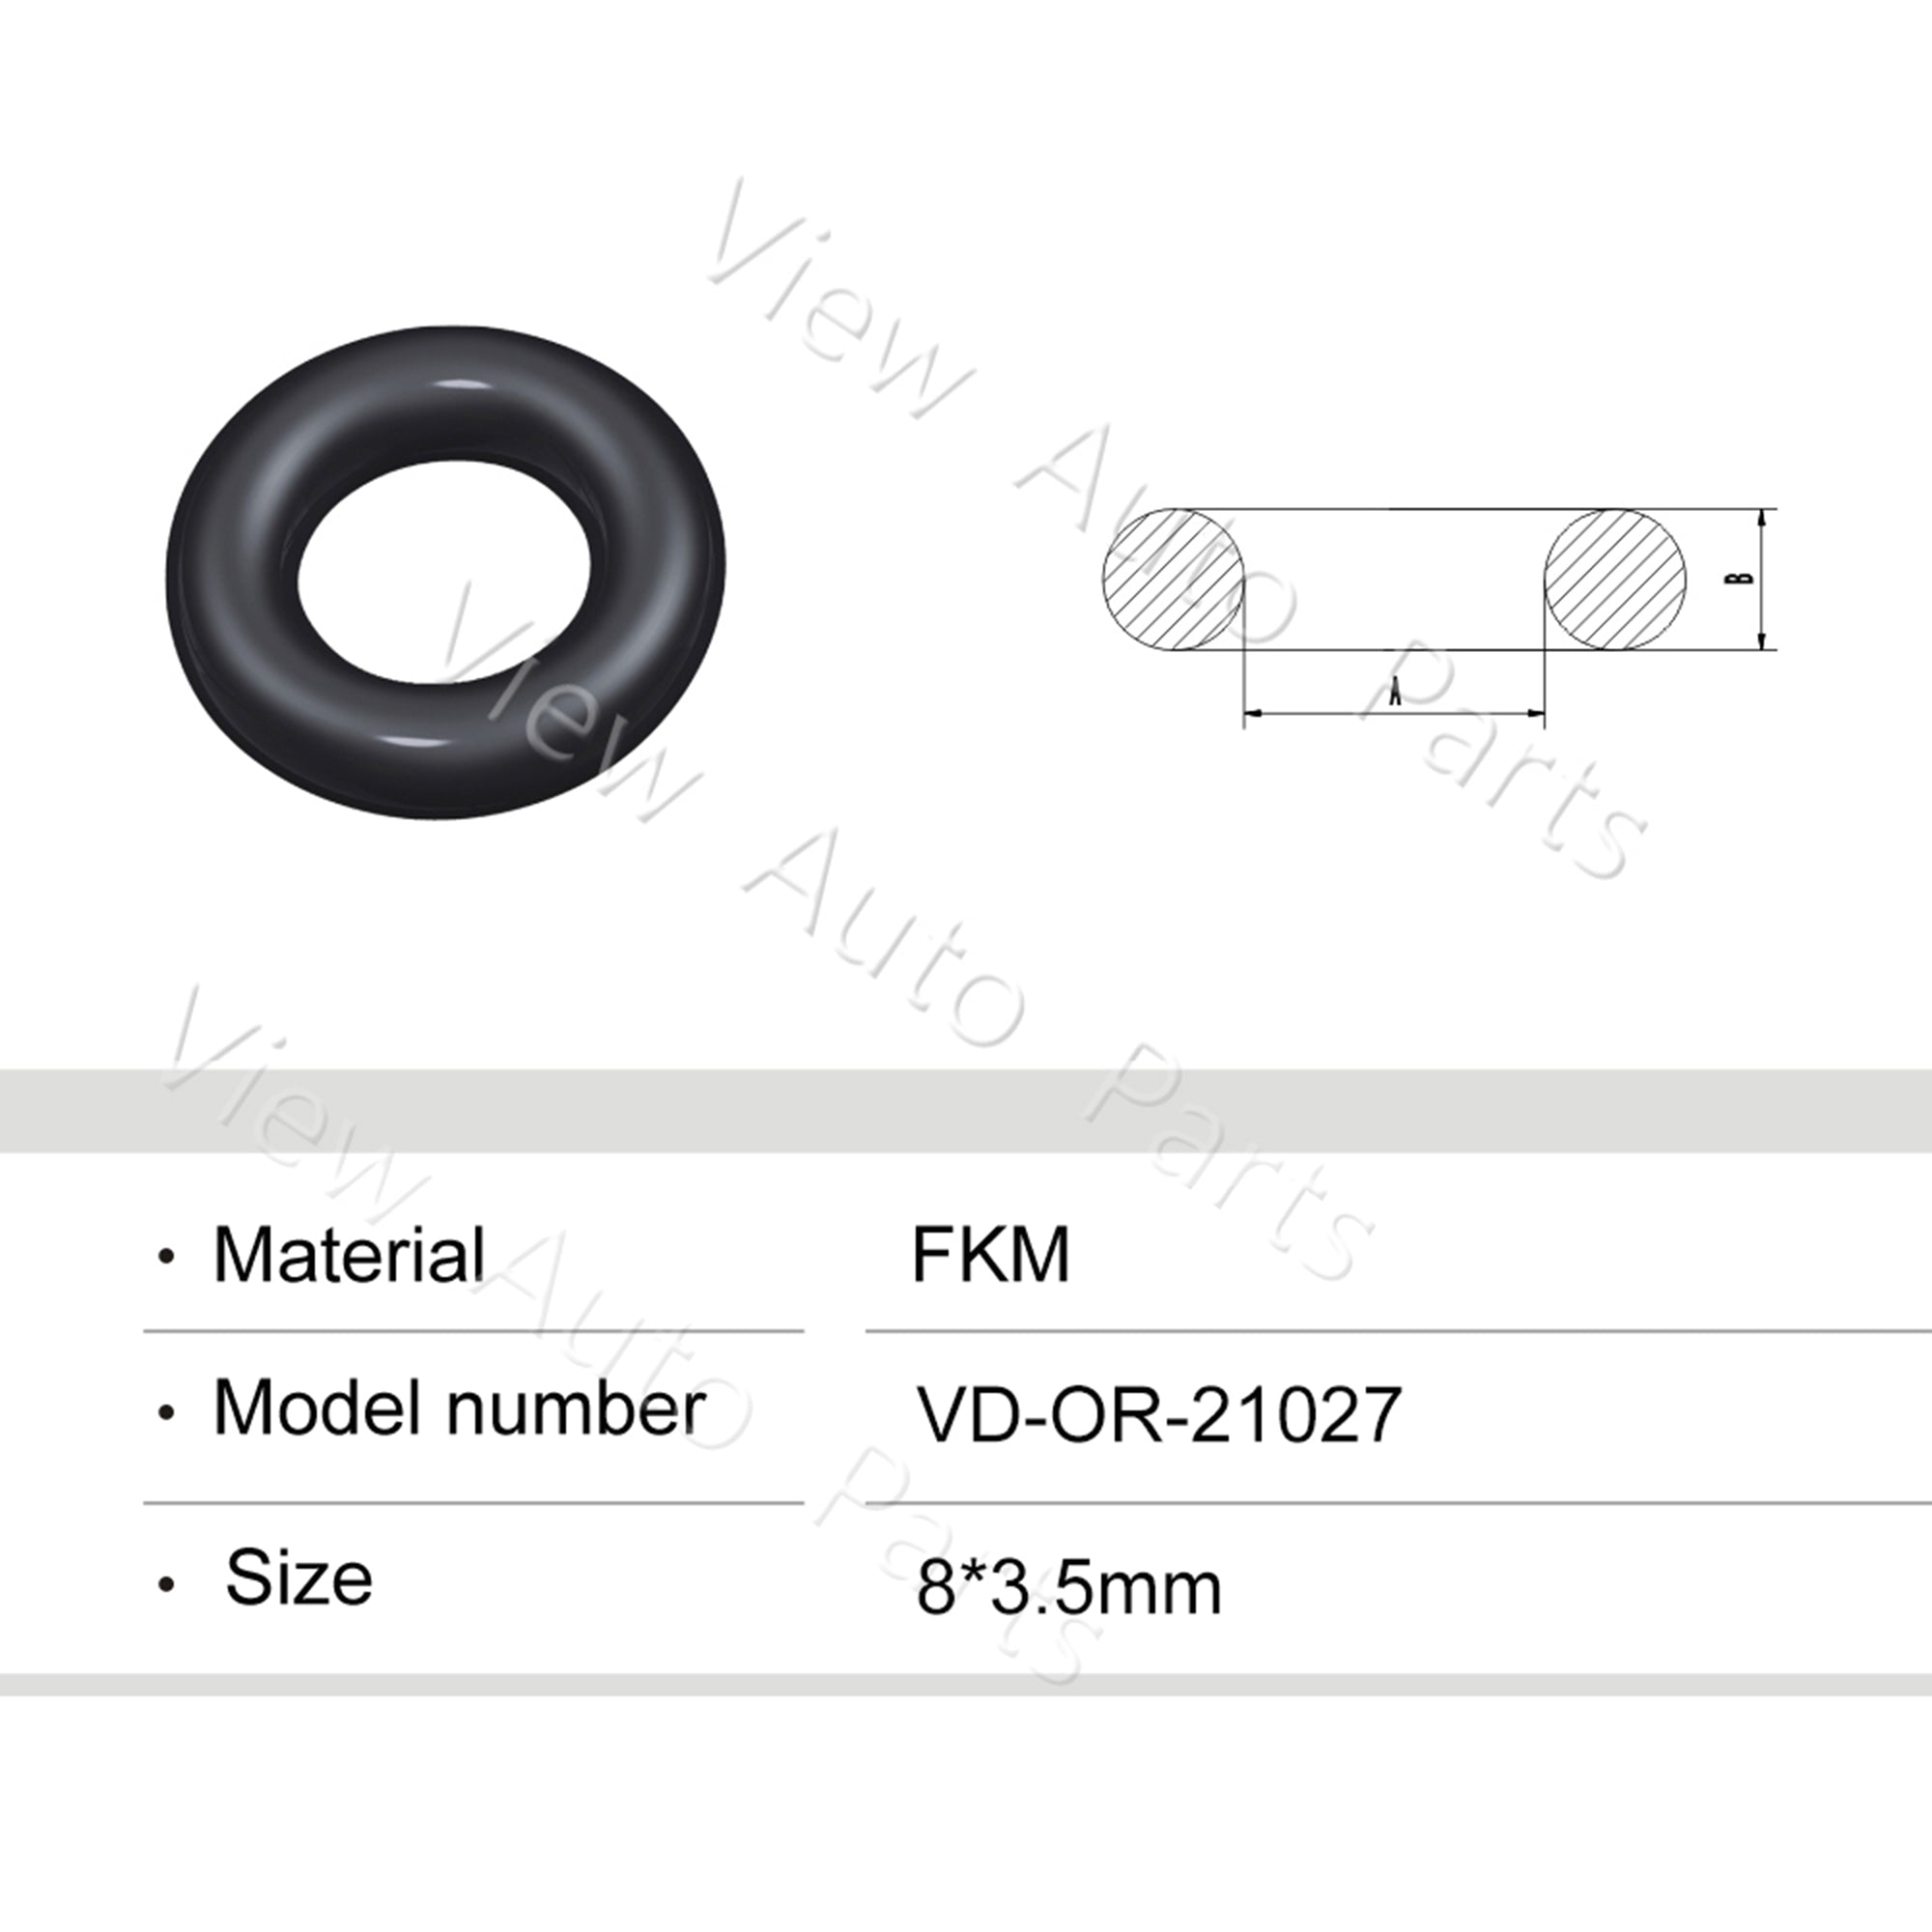 Fuel Injector Rubber Seal Orings for Fuel Injector Repair Kits FKM & Rubber Heat Resistant, Size: 8*3.5mm OR-21027